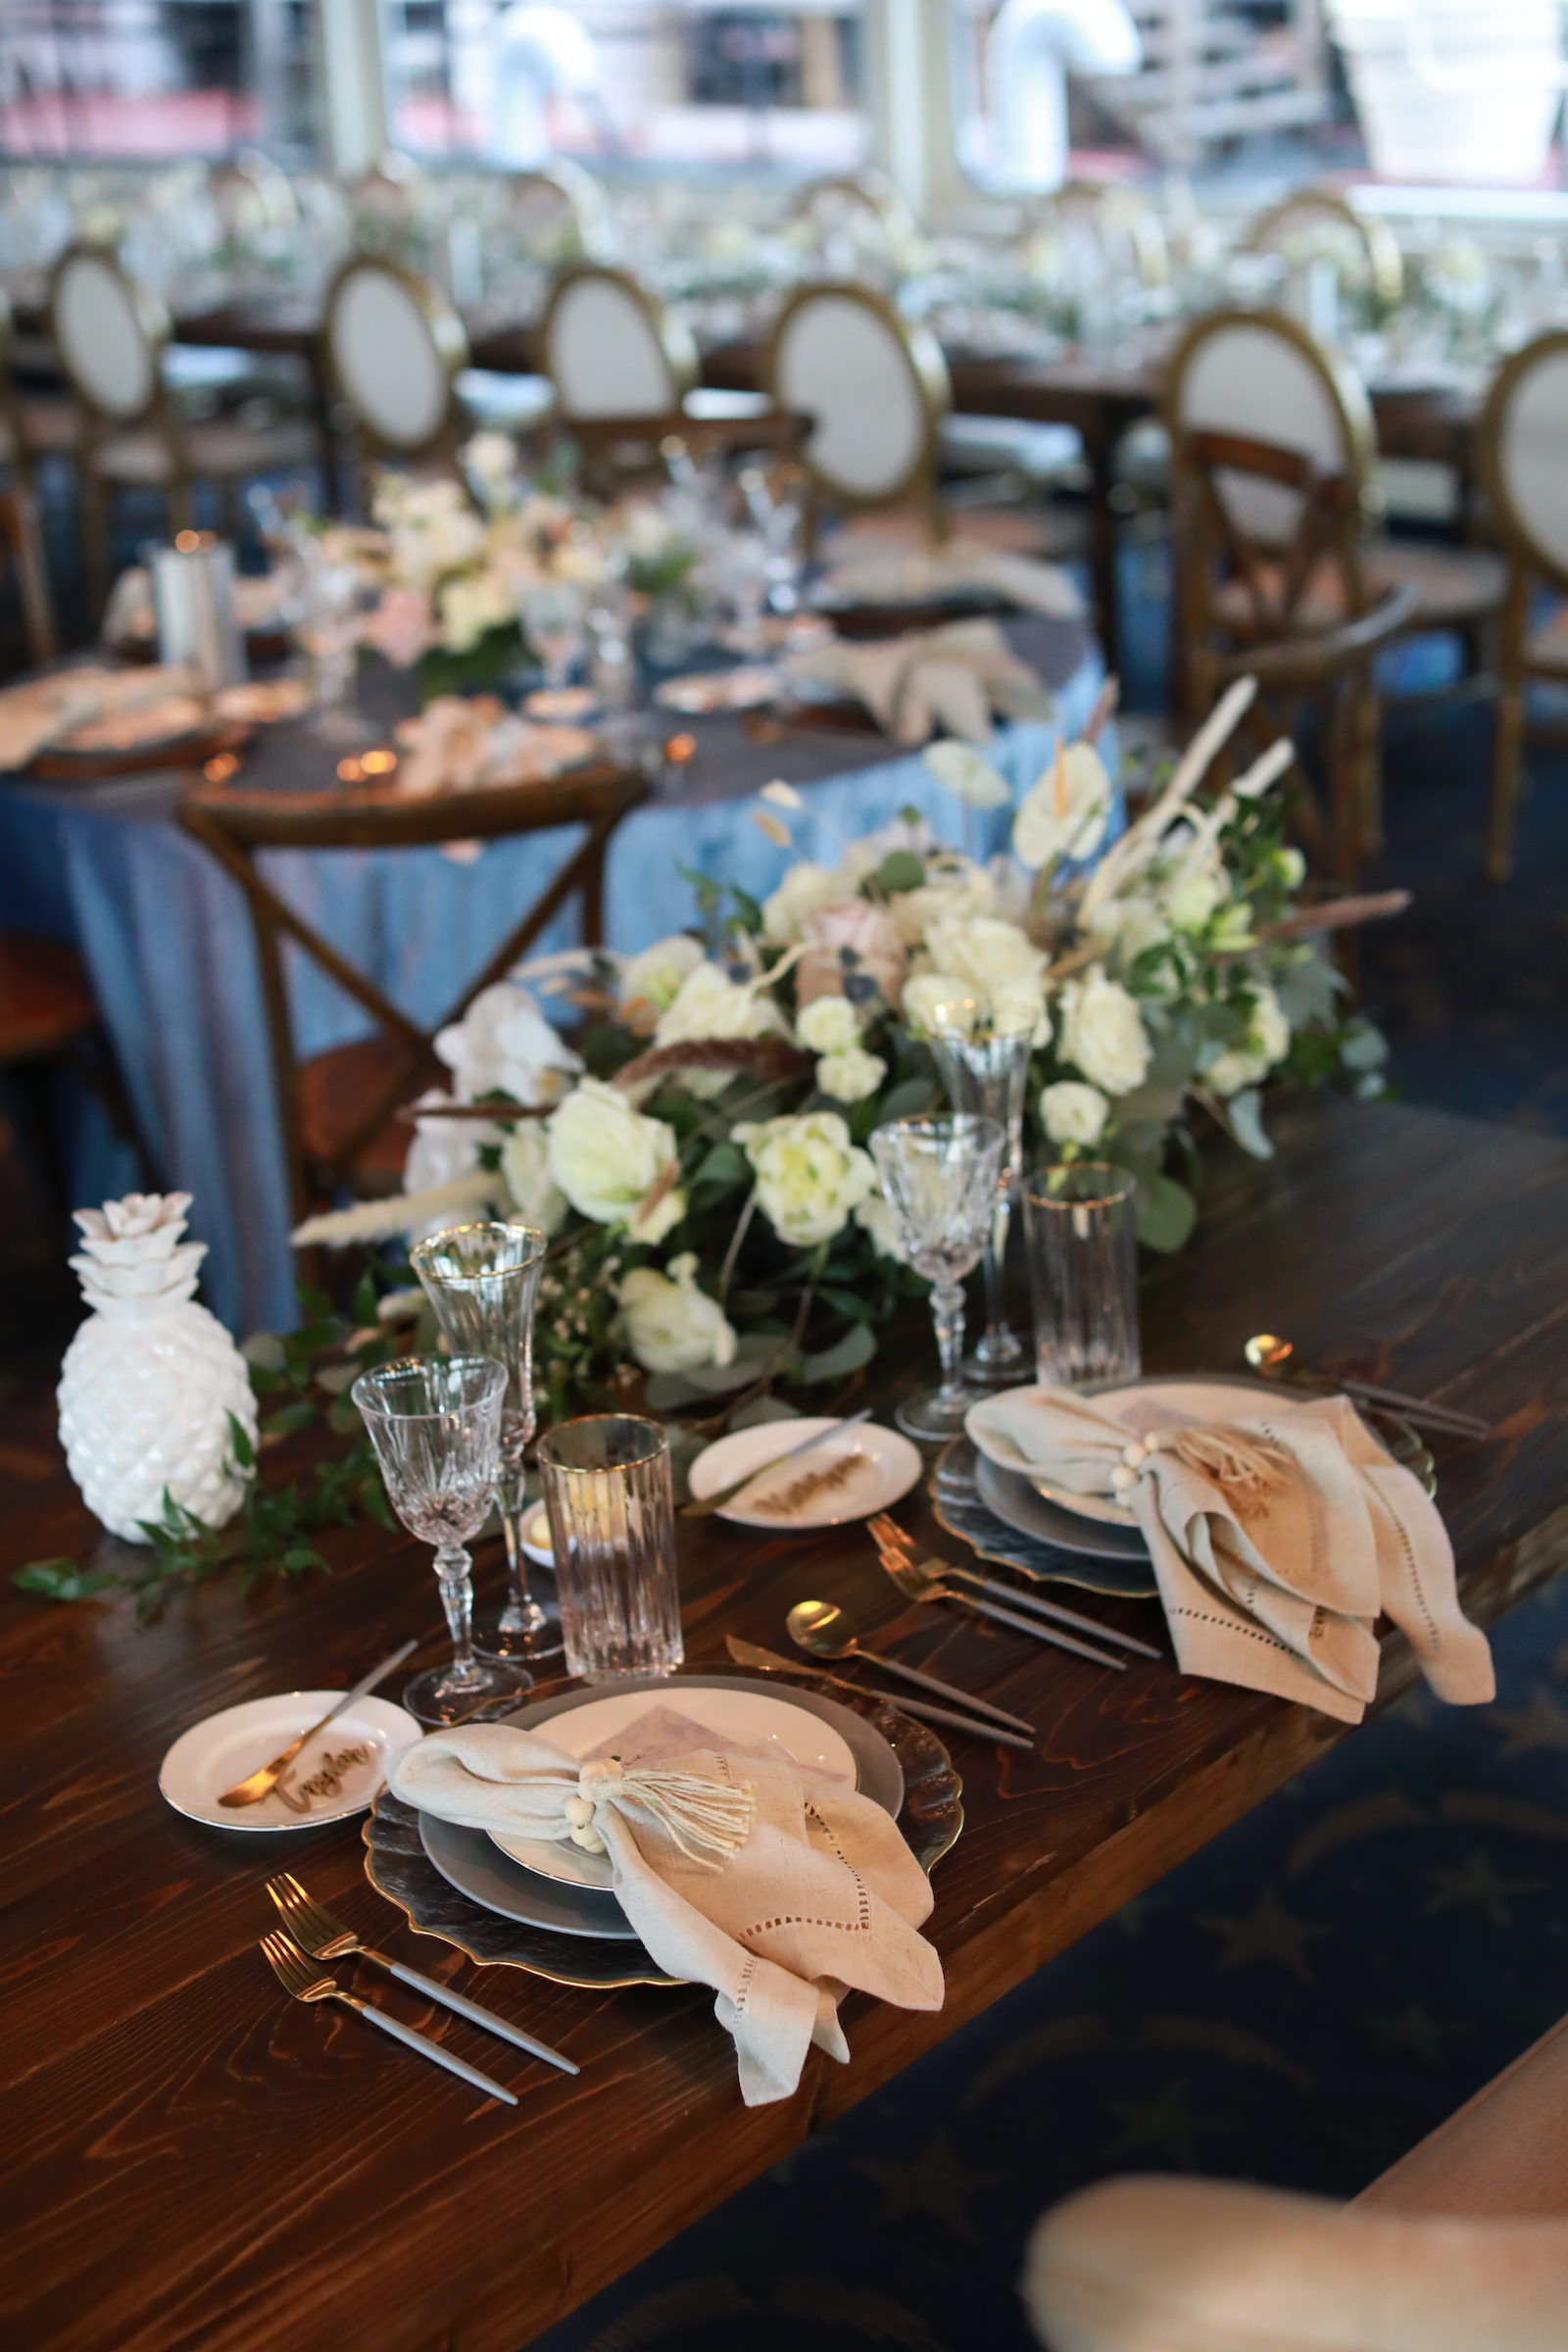 Romantic Blue Coastal Chic Wedding Reception Decor, Blue and Gold Silverware, White Linen Napkin, Wooden Table, Rope Nautical Knot Napkin Ring Holder, White Roses and Greenery Floral Arrangement | Tampa Bay Wedding Photographer Lifelong Photography Studio | Wedding Rentals Kate Ryan Event Rentals